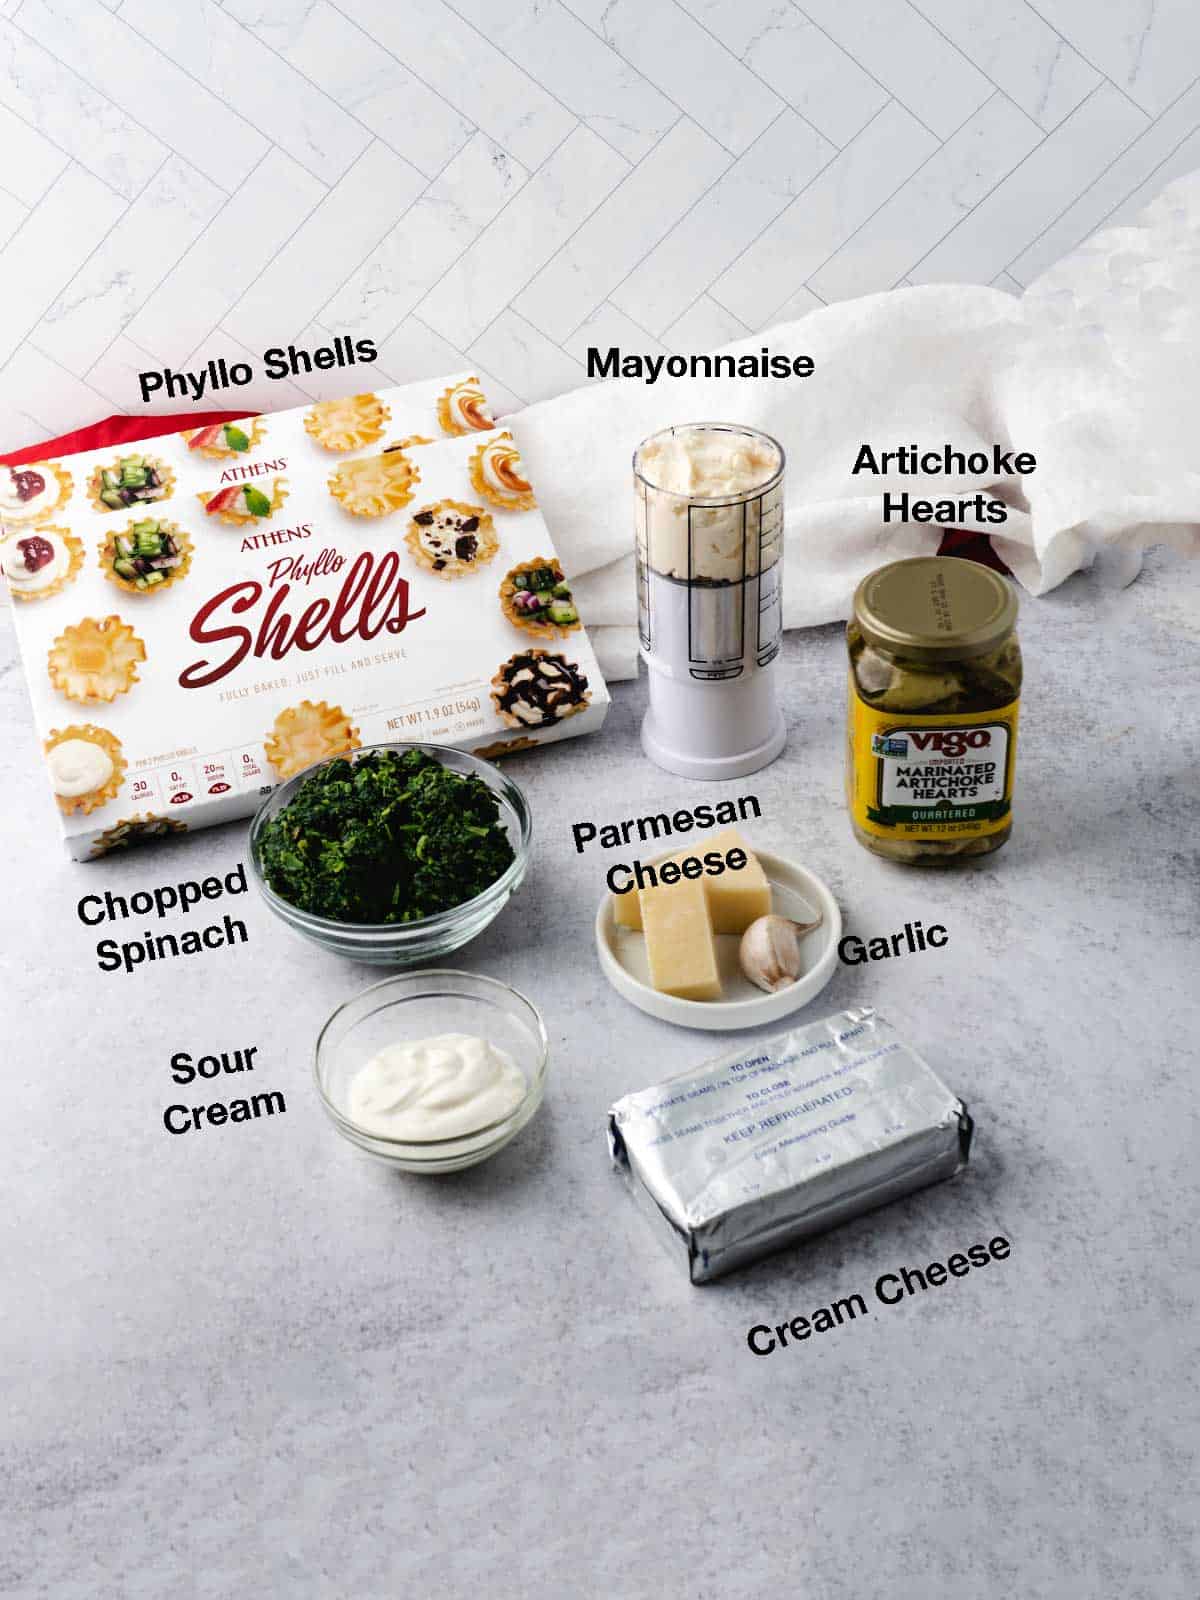 Ingredients for make ahead spinach artichoke tartlets